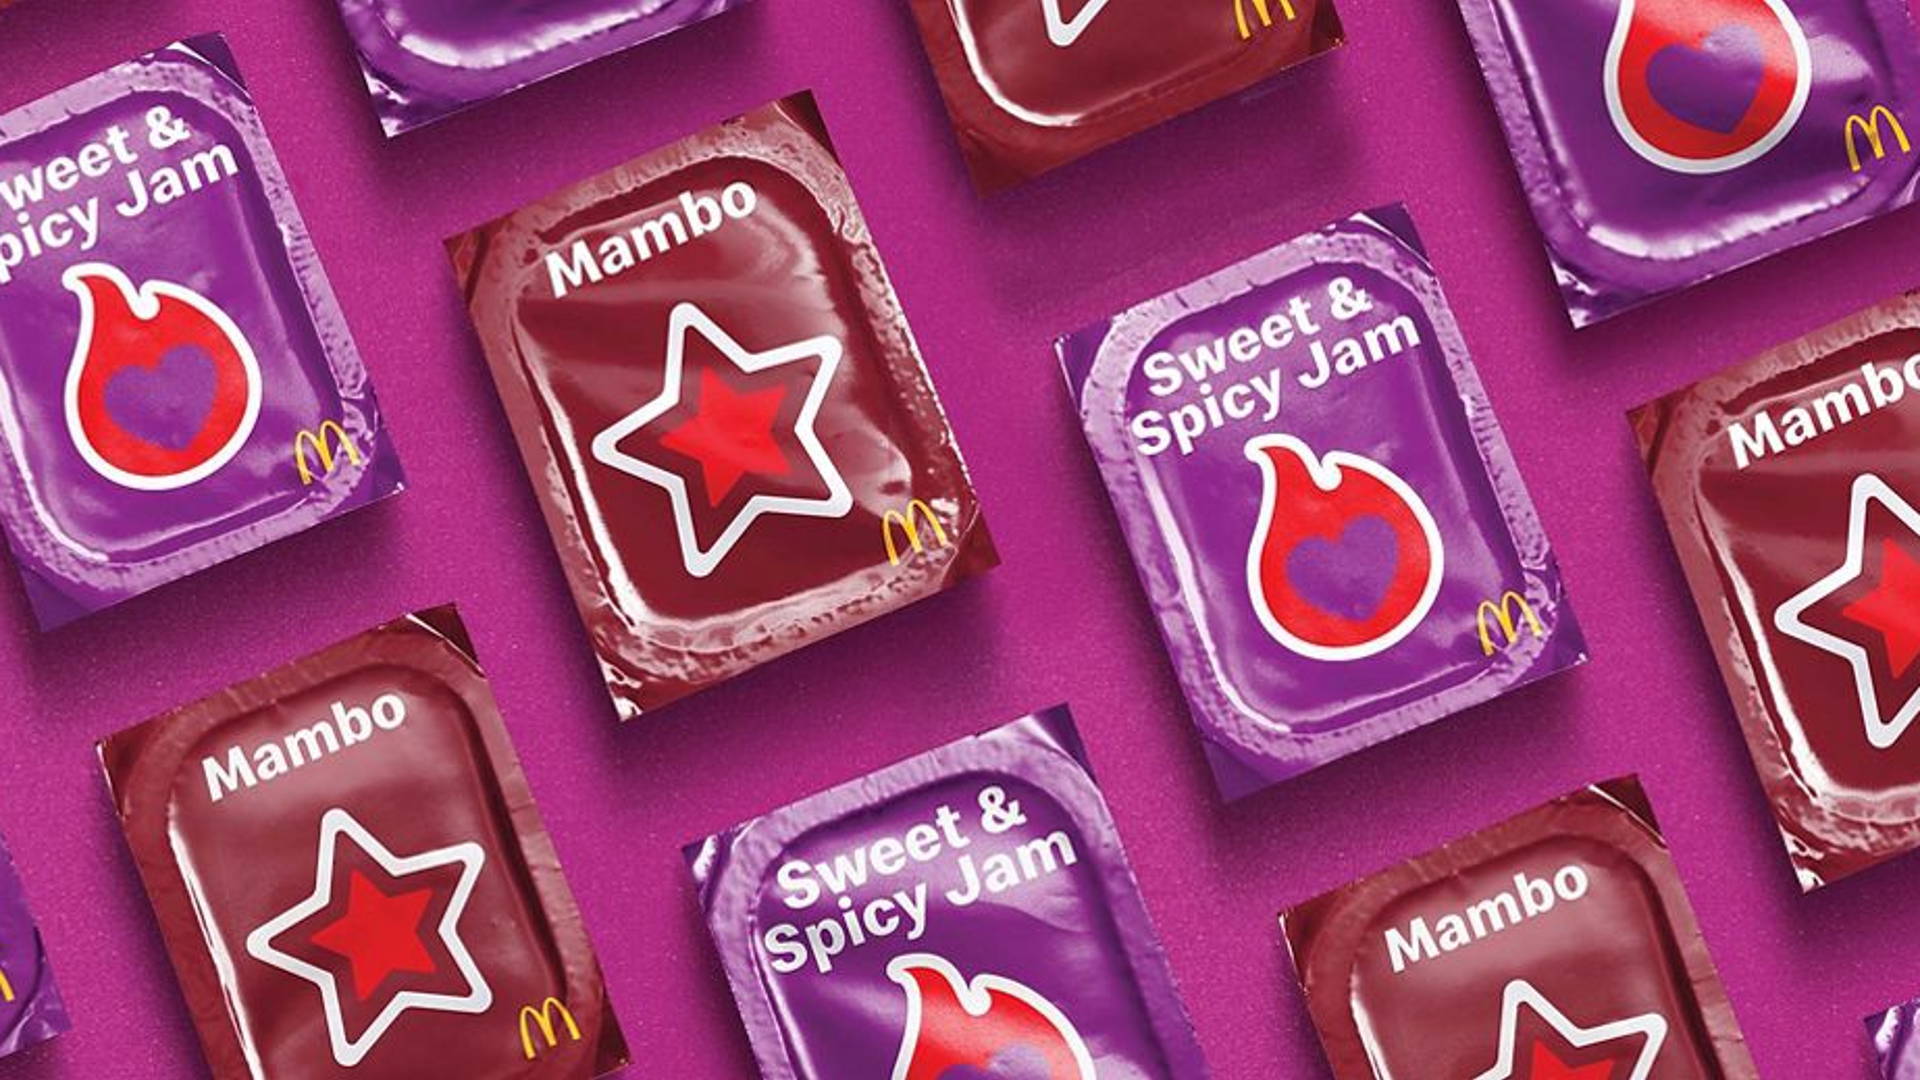 Featured image for McDonald's Adds Two New Sauces To Its Lineup, Mambo and Sweet & Spicy Jam